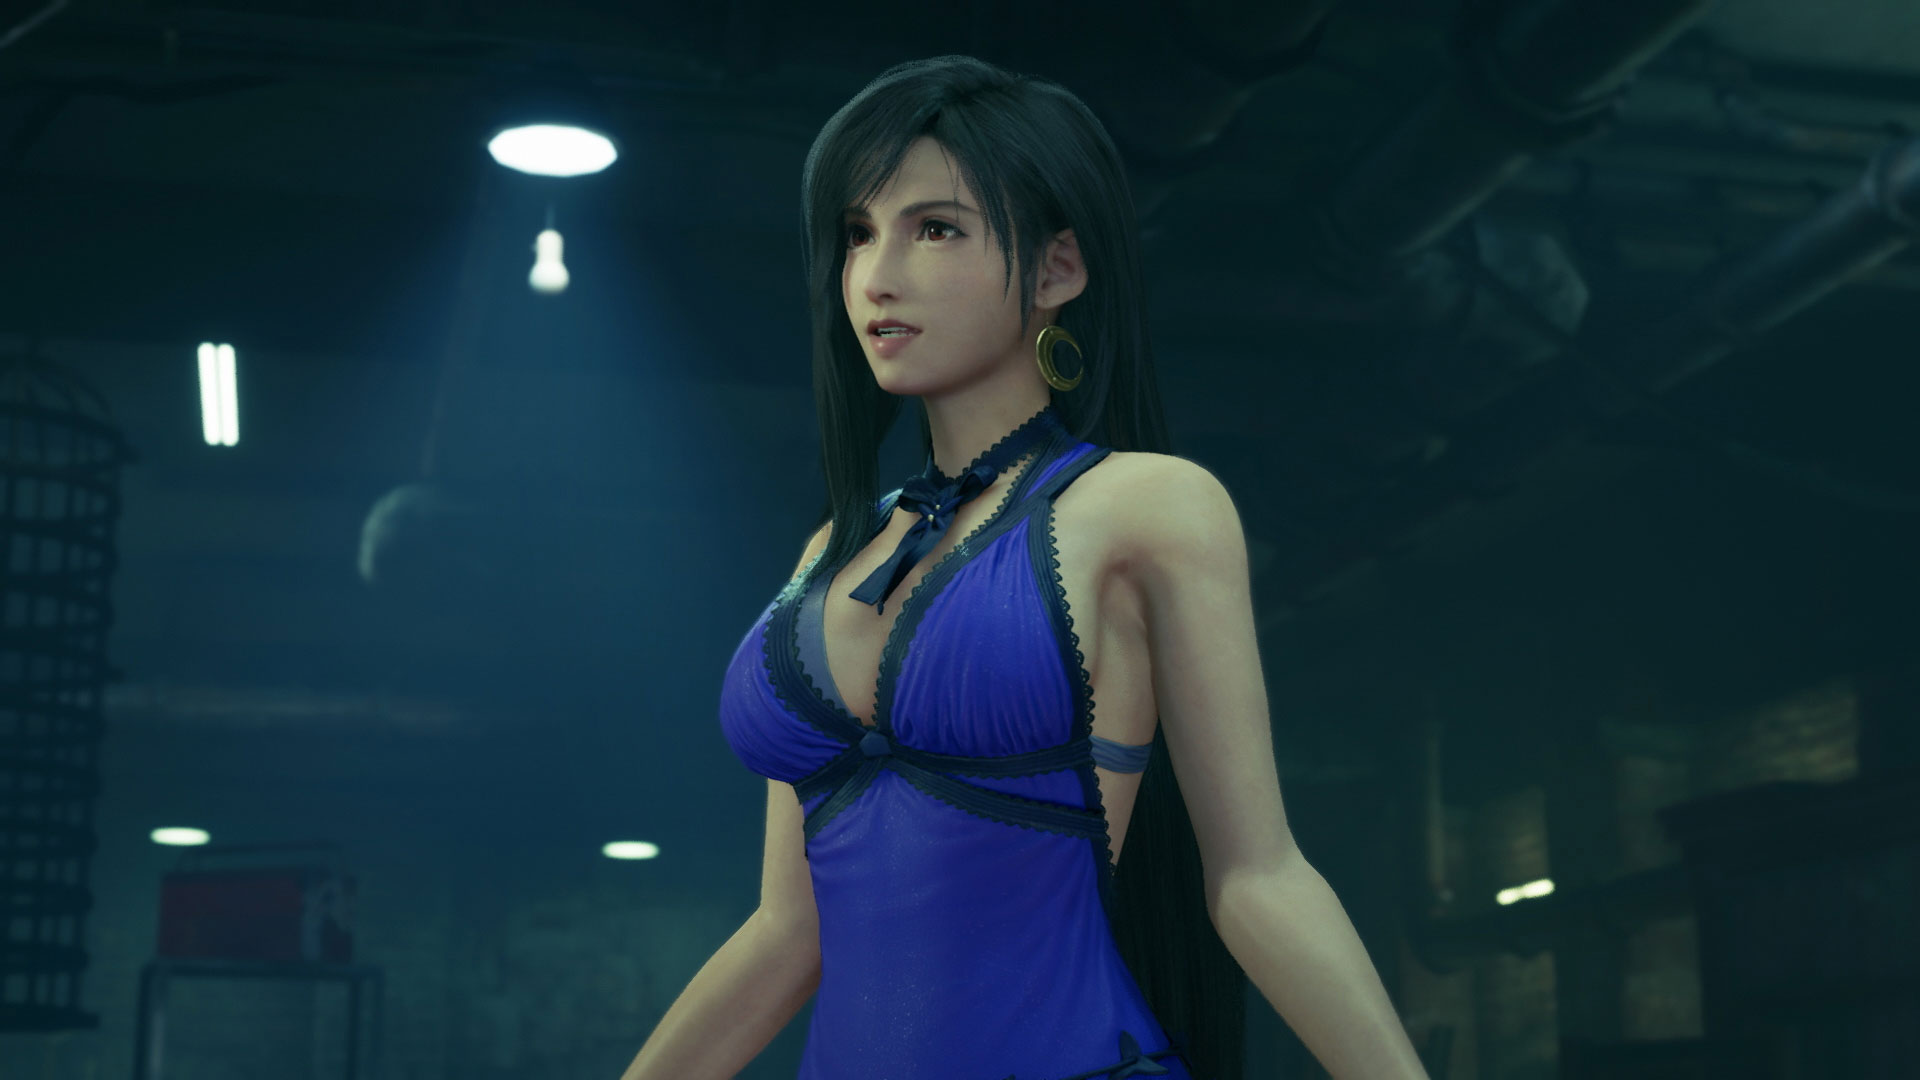 Square Enix has released a video recapping the events of Final Fantasy VII Remake